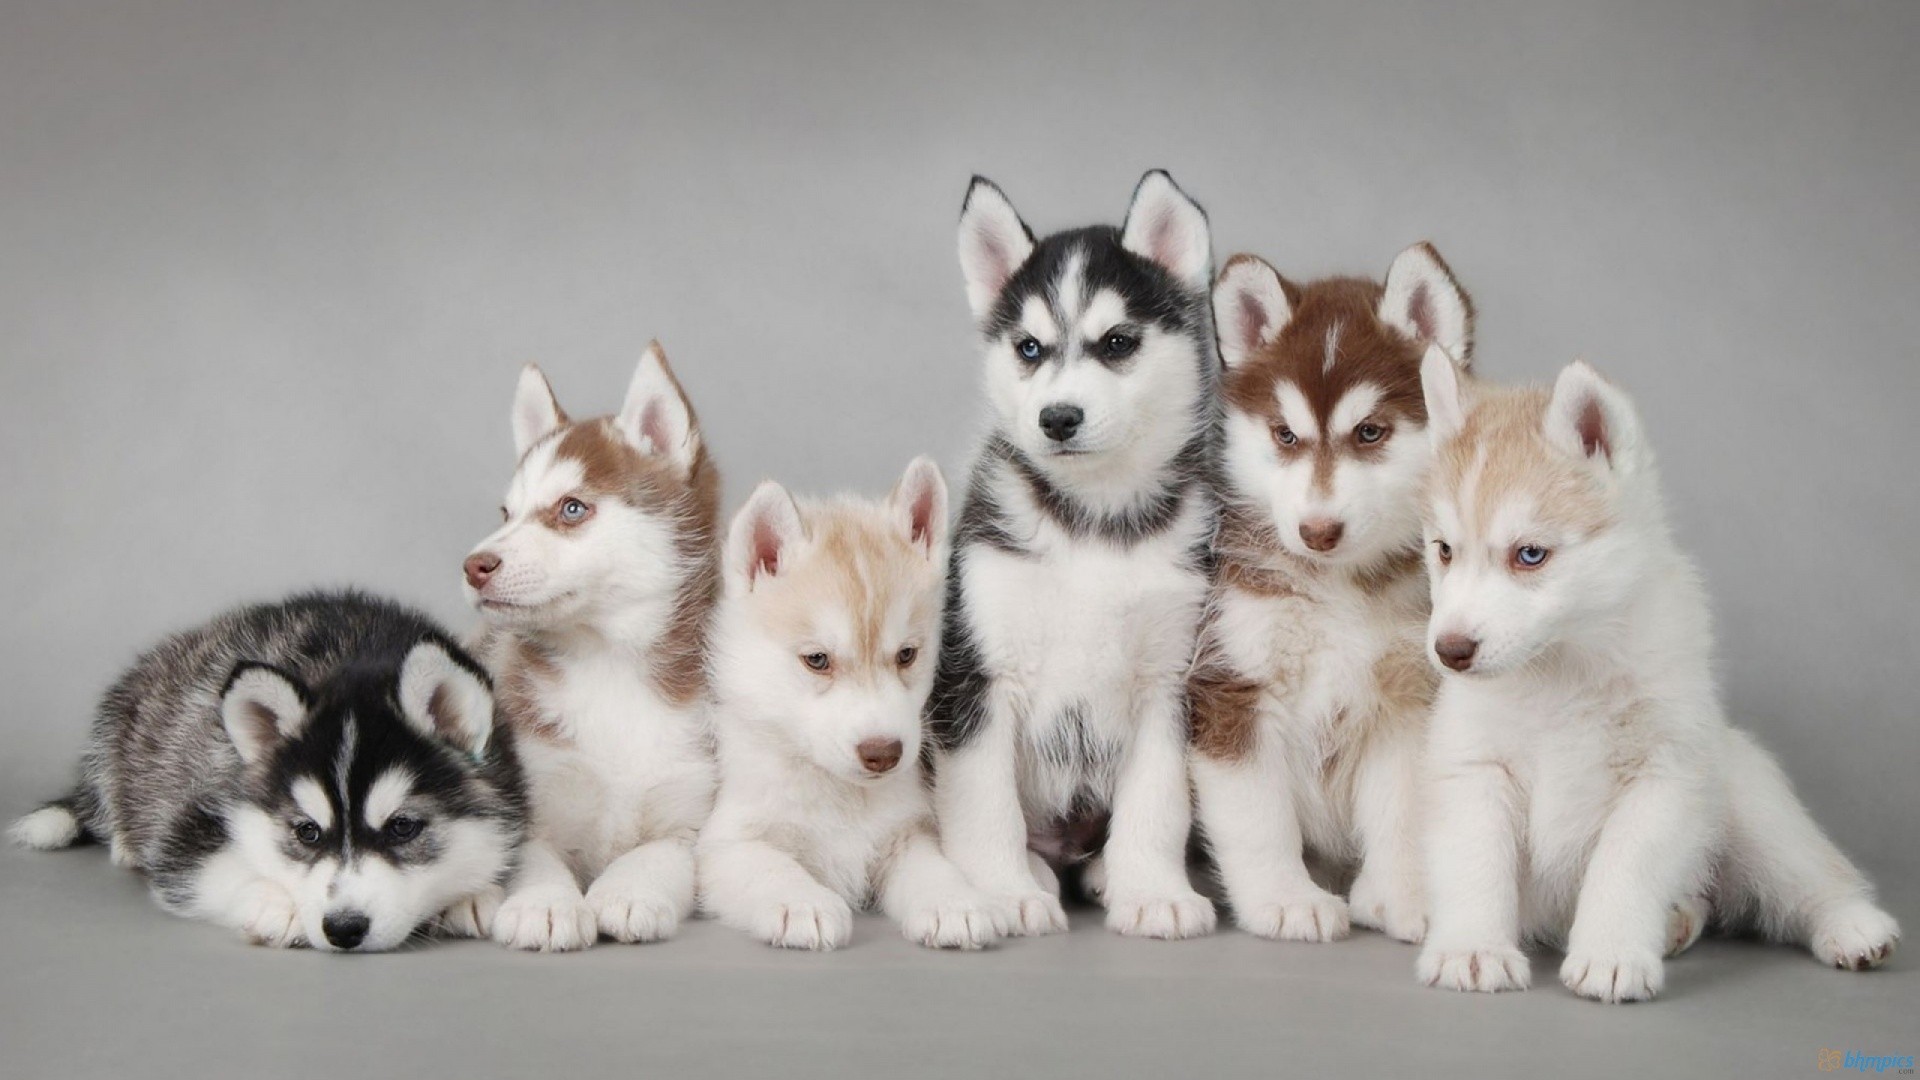 Free Download Cute Husky Puppies Hd Wallpaper Of Animals 1920x1080 For Your Desktop Mobile Tablet Explore 71 Husky Dog Wallpaper Siberian Husky Wallpaper Siberian Husky Wallpaper For Computer Alaskan Husky Wallpaper - cute husky puppy roblox